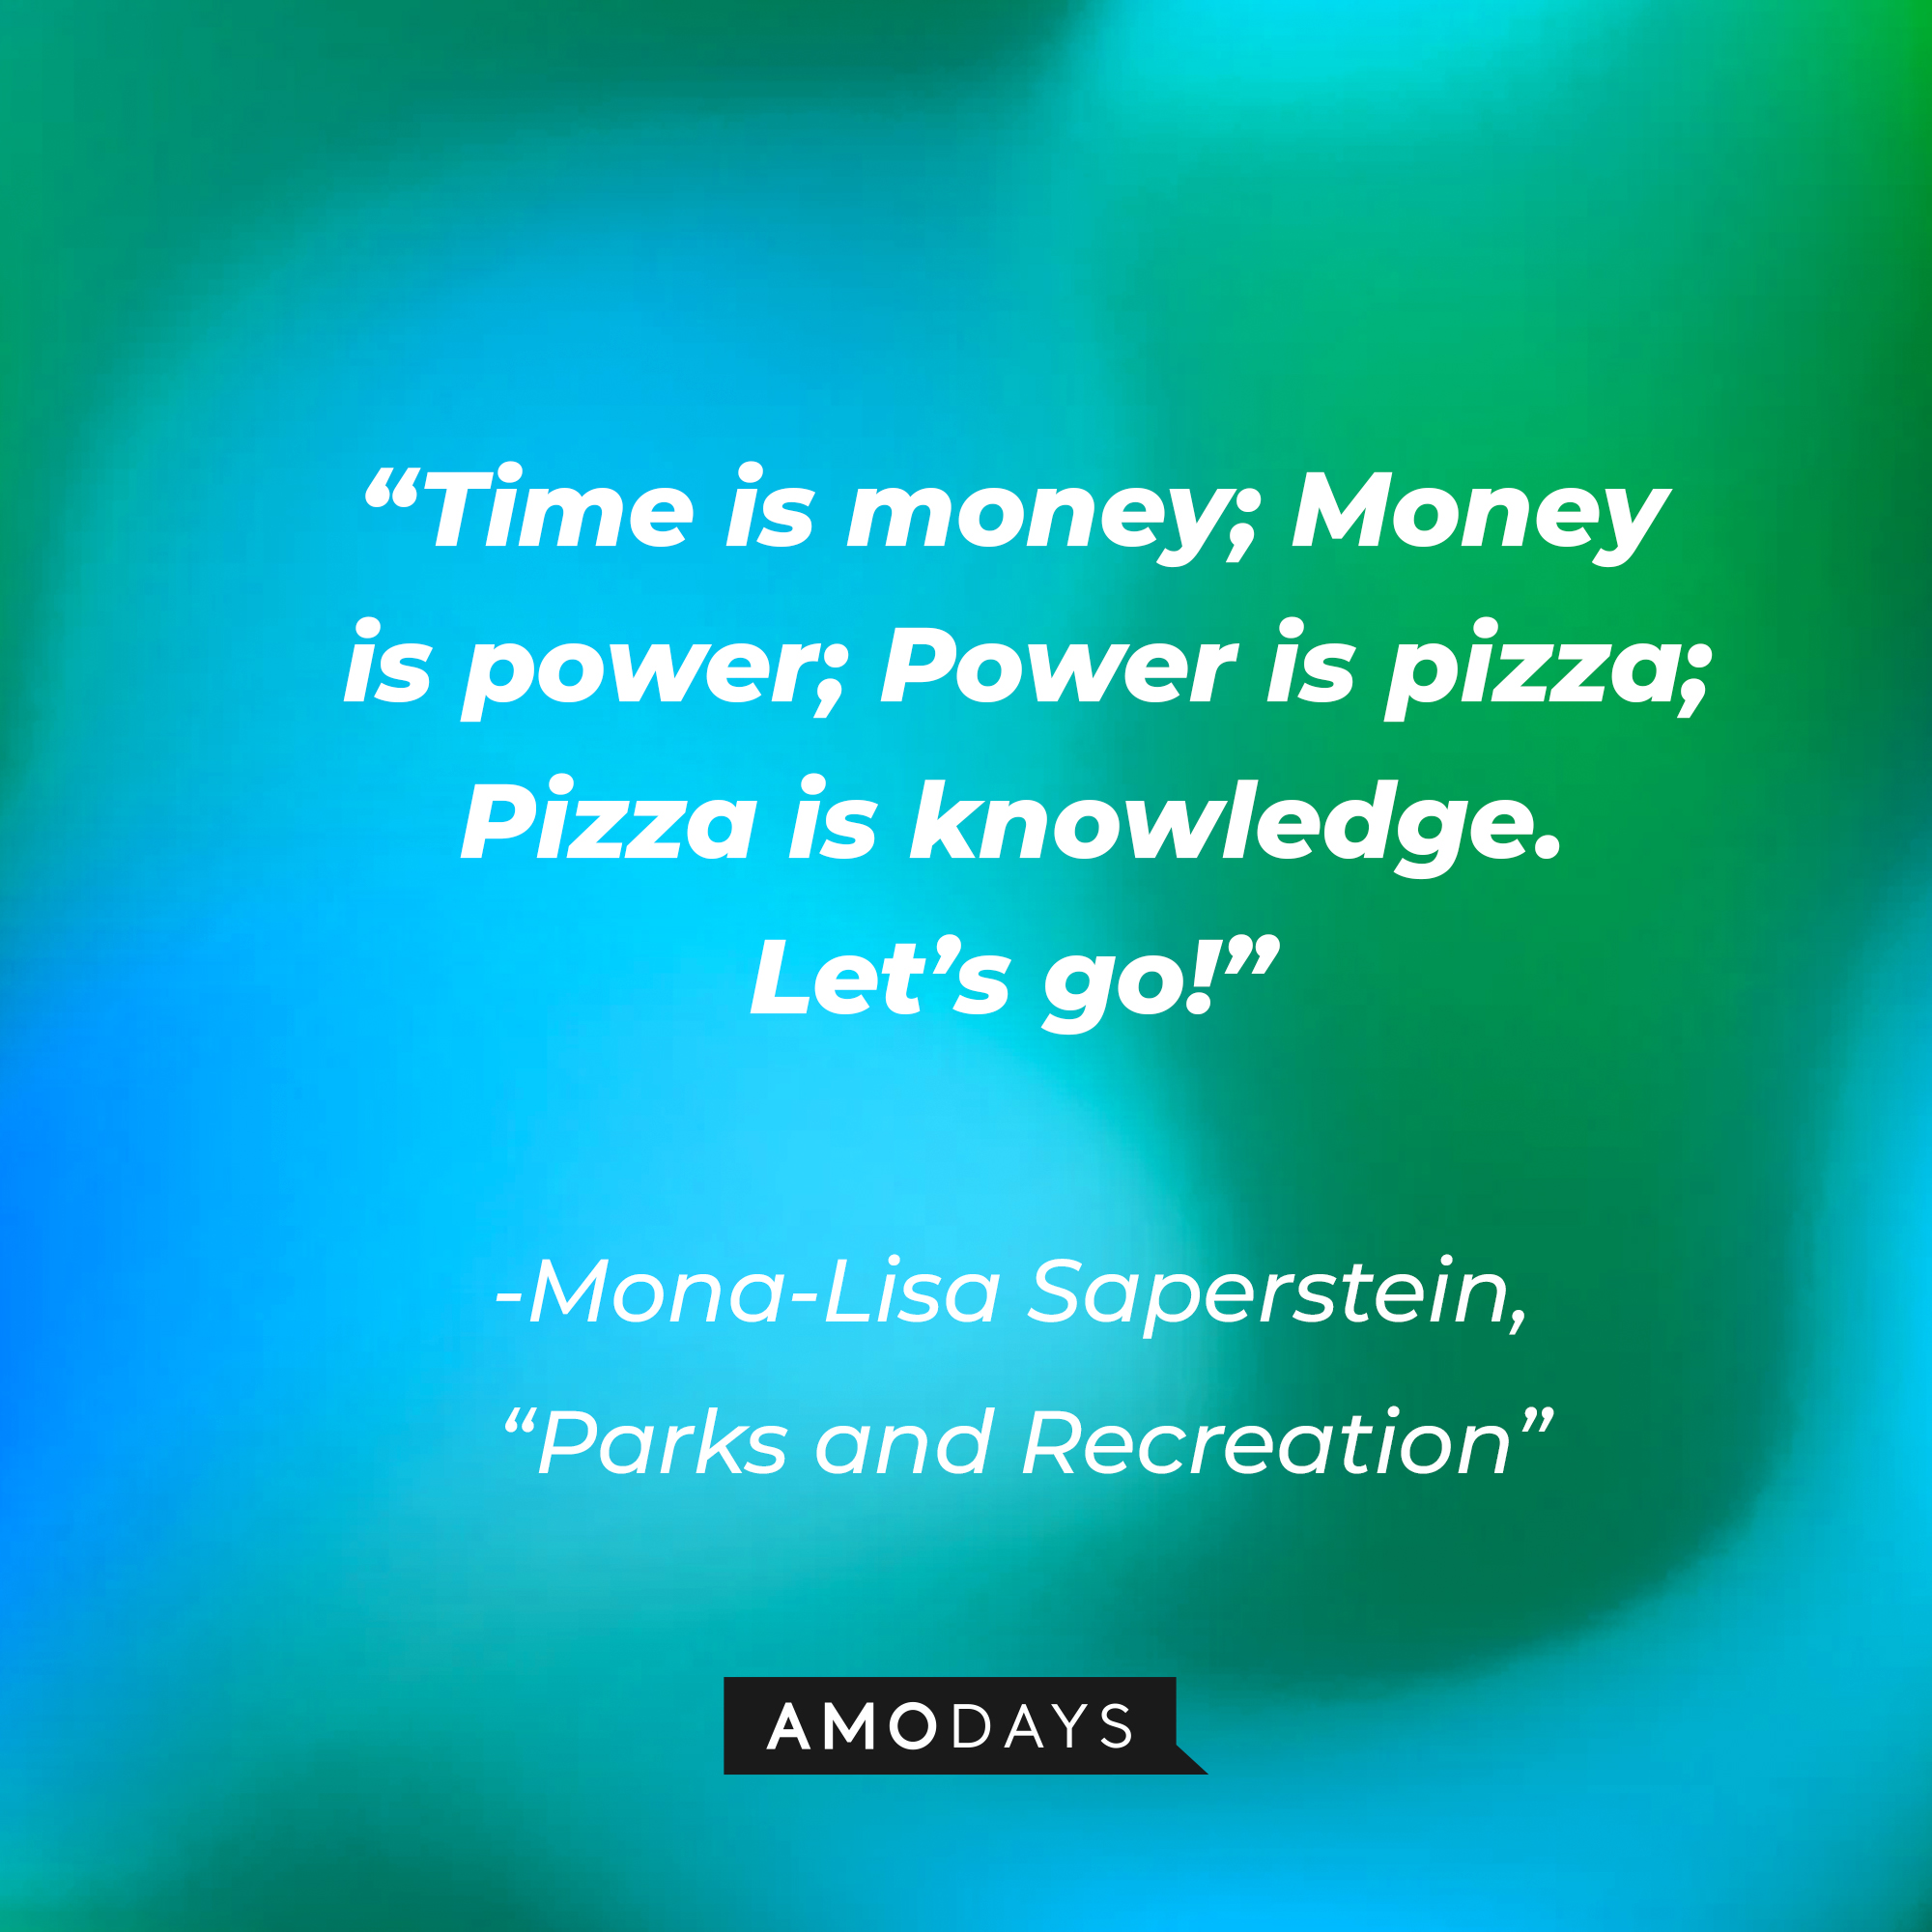 Mona-Lisa Saperstein's quote on "Parks and Recreation:" “Time is money; Money is power; Power is pizza; Pizza is knowledge. Let’s go!” | Source: AmoDays